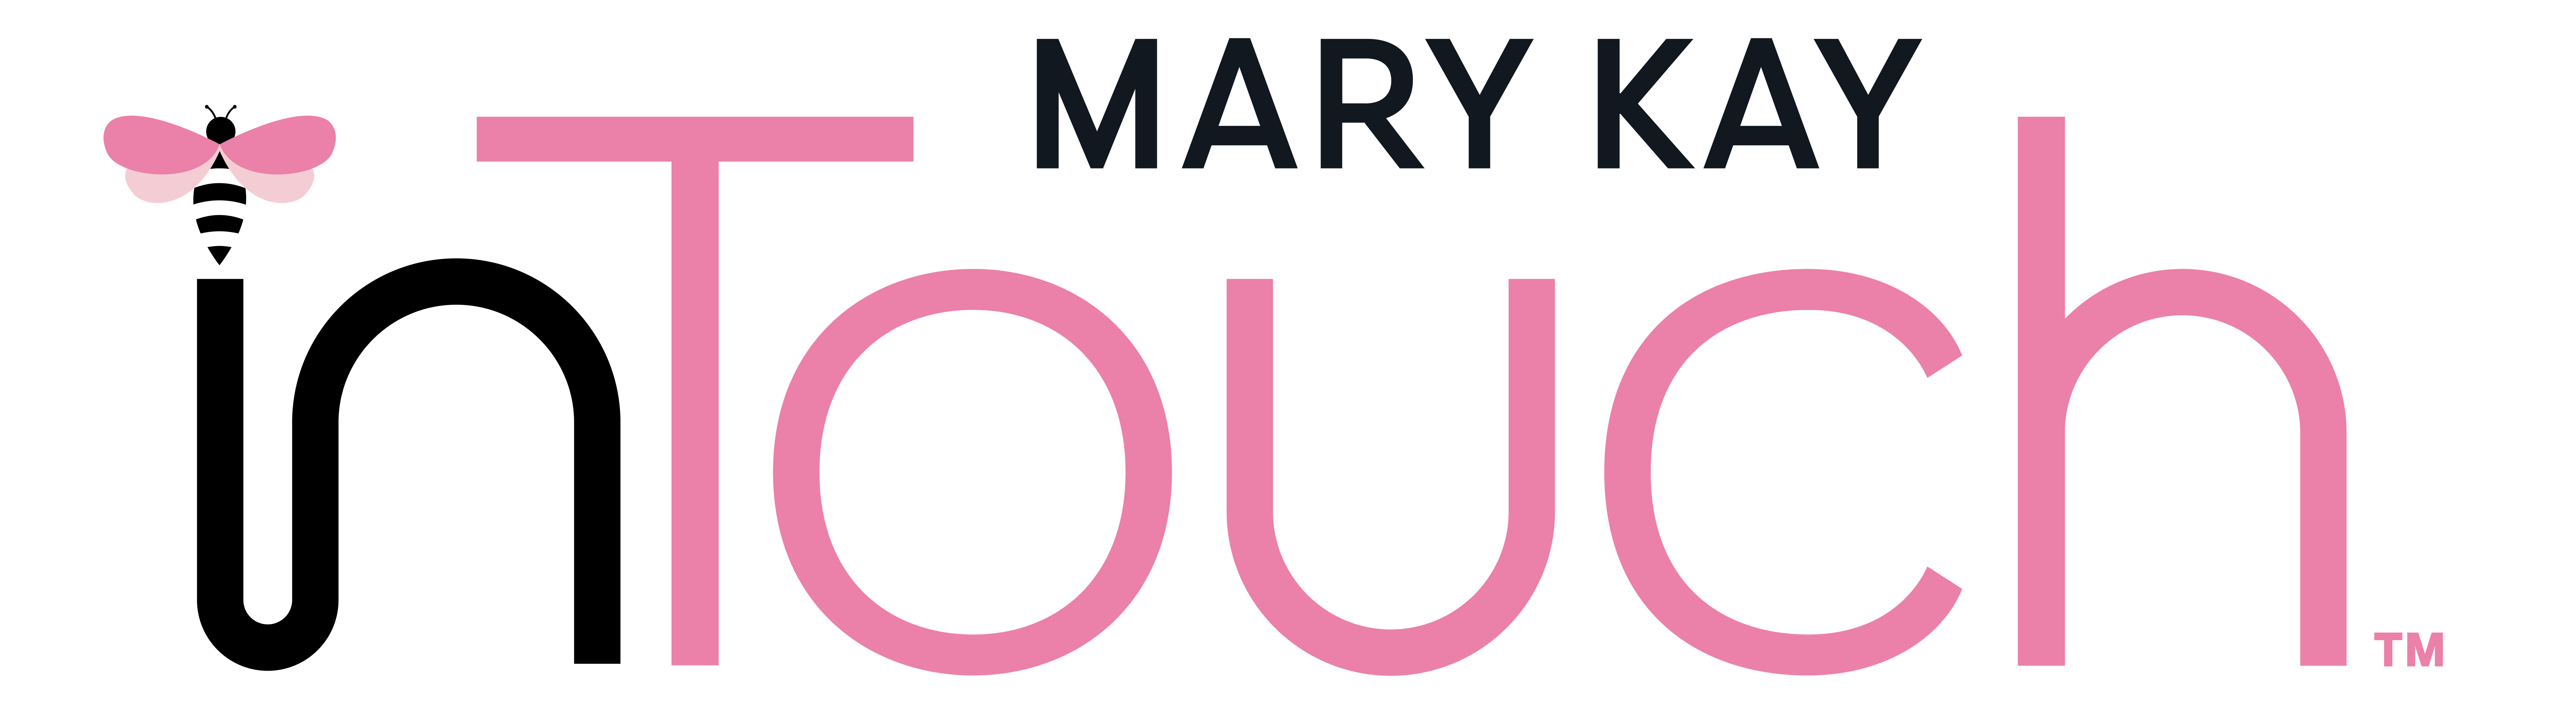 Kay intouch login mary Marykayintouch com